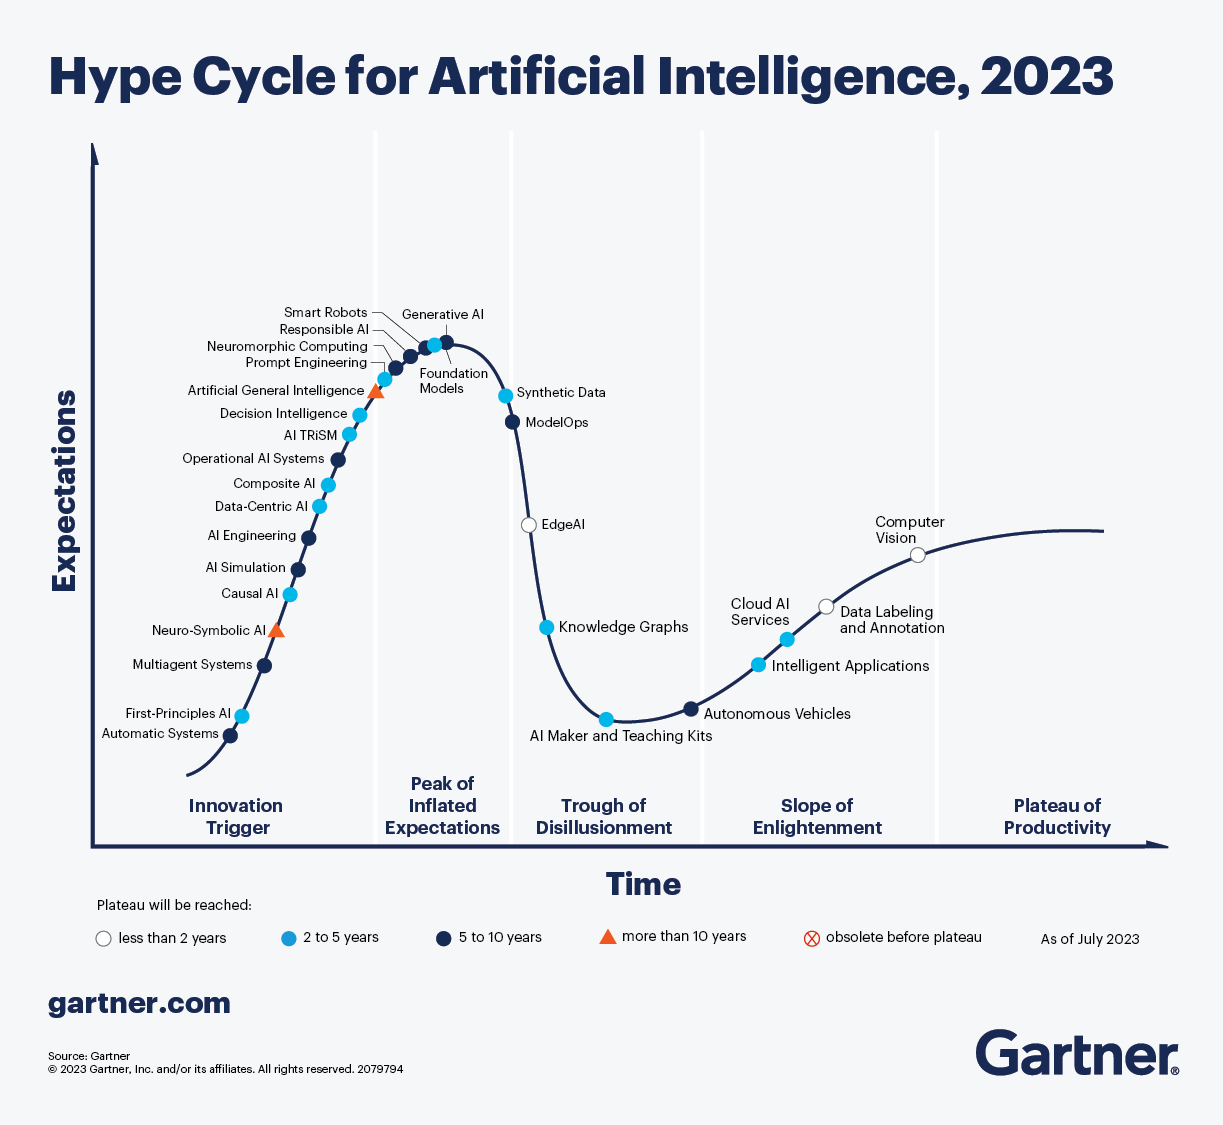 Figura 1. Hype Cycle for Artificial Intelligence